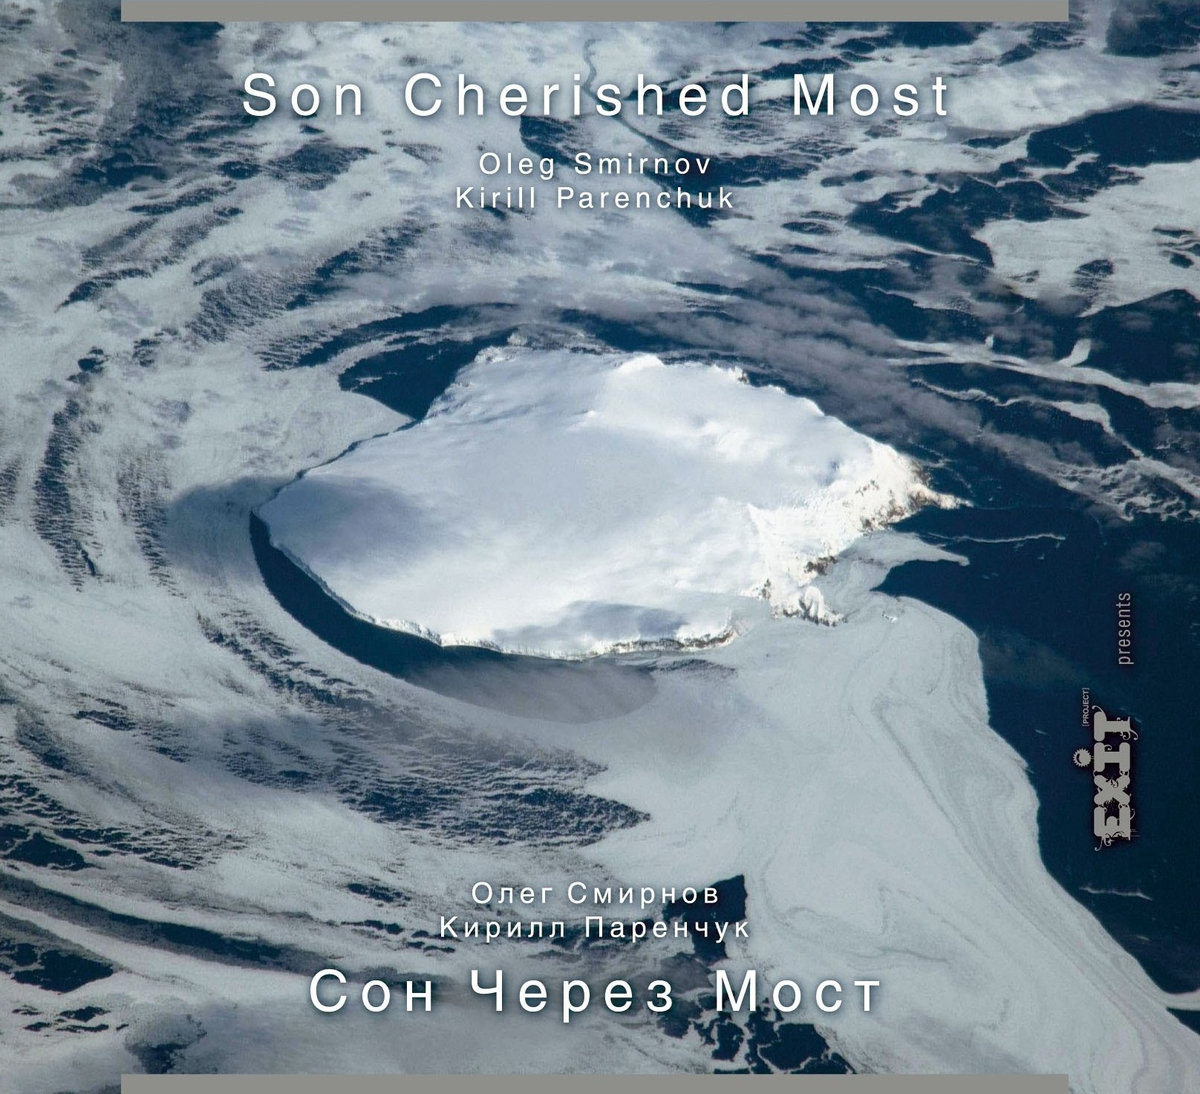 EXIT project - Intro Scene: Immersing Pulse @ 'EXIT project - Son Cherished Most' album (electronic, ambient)